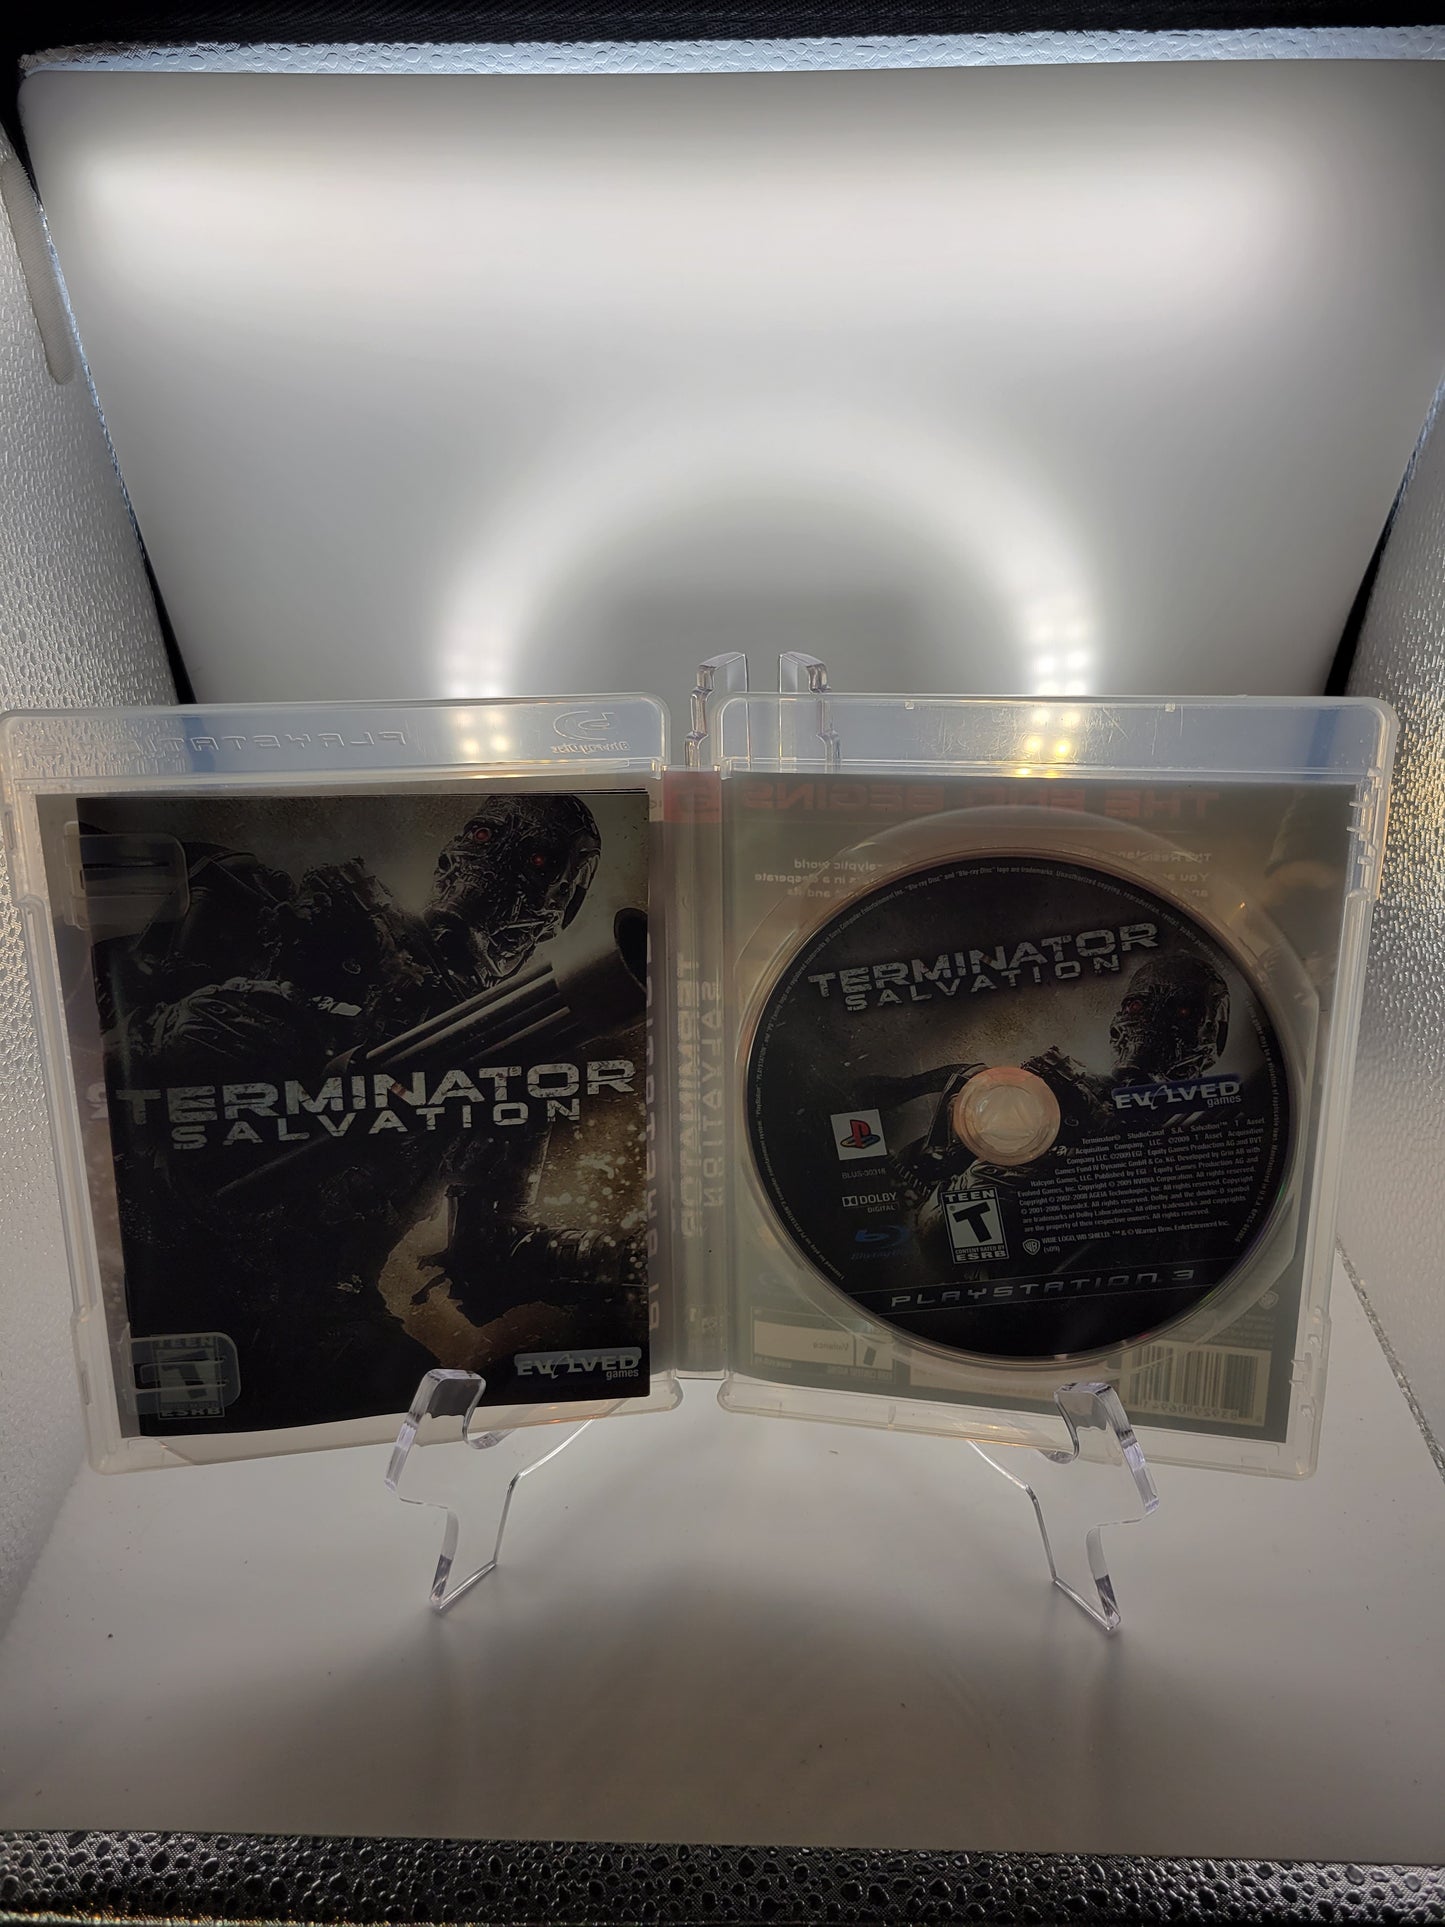 Sony Playstation 3 Terminator Salvation Video Game